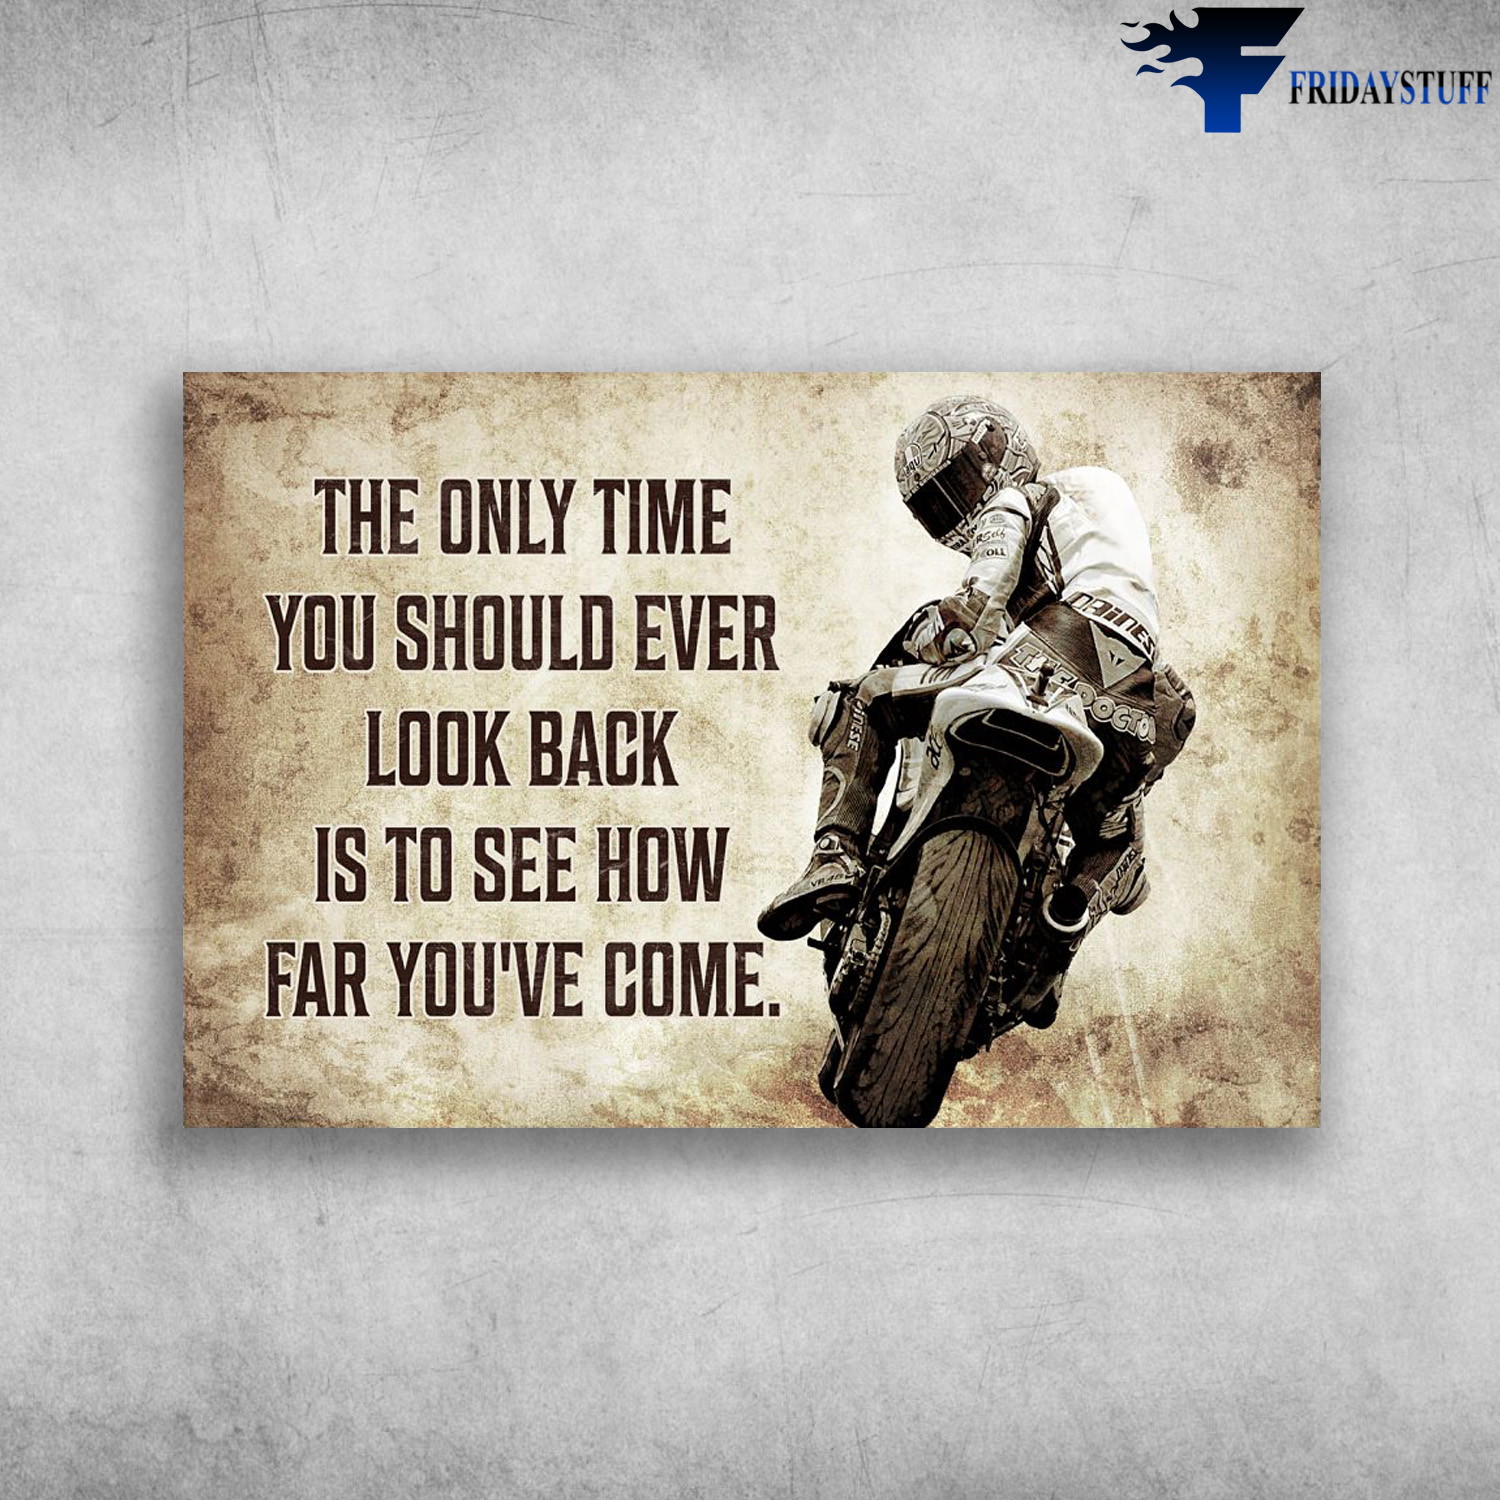 Man Motorbike - The Only Time You Should Ever Look Back Is To See How Far You've Come, Man motorcycle